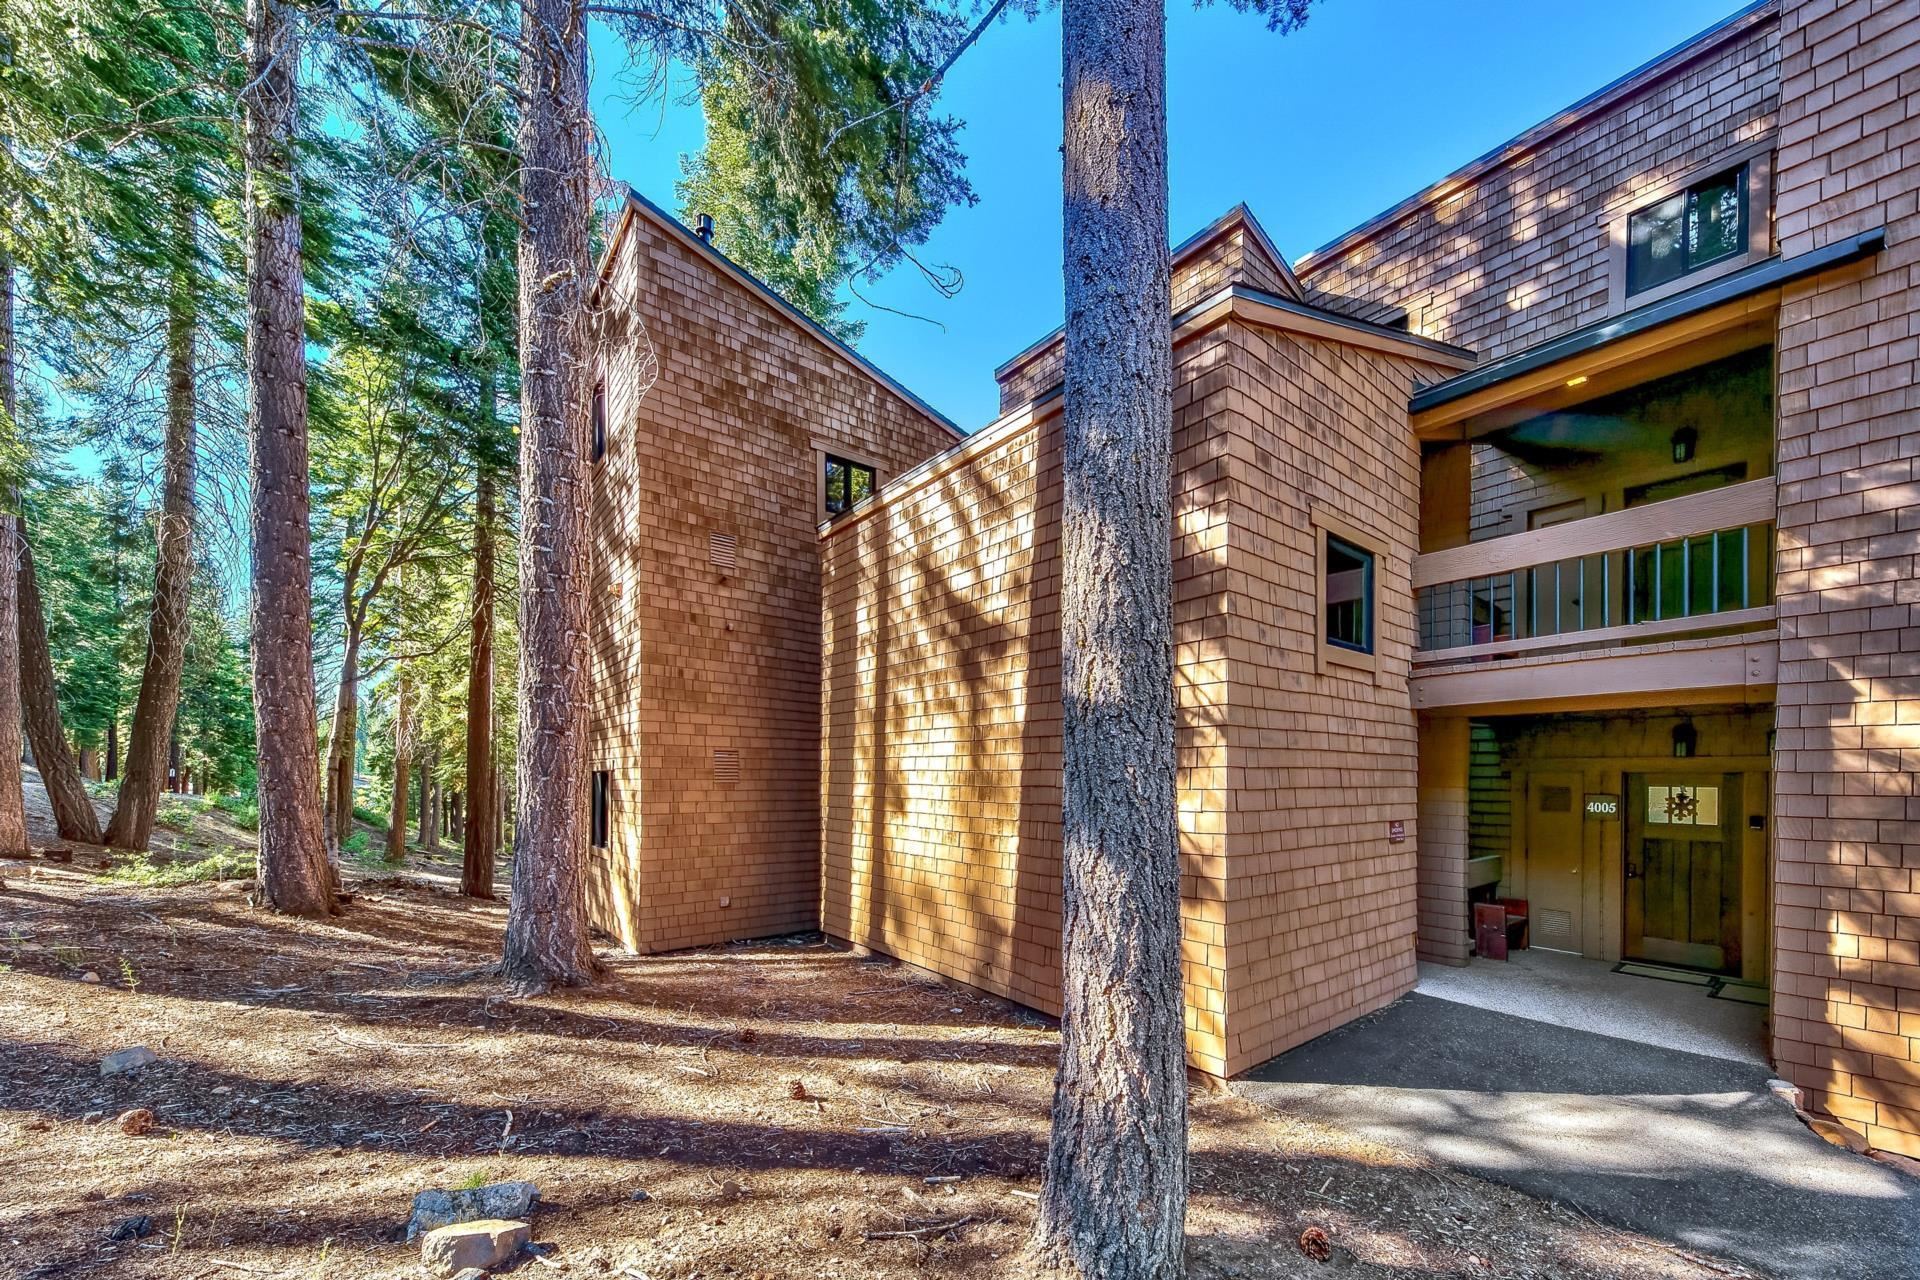 Image for 4002 Ski View, Truckee, CA 96161